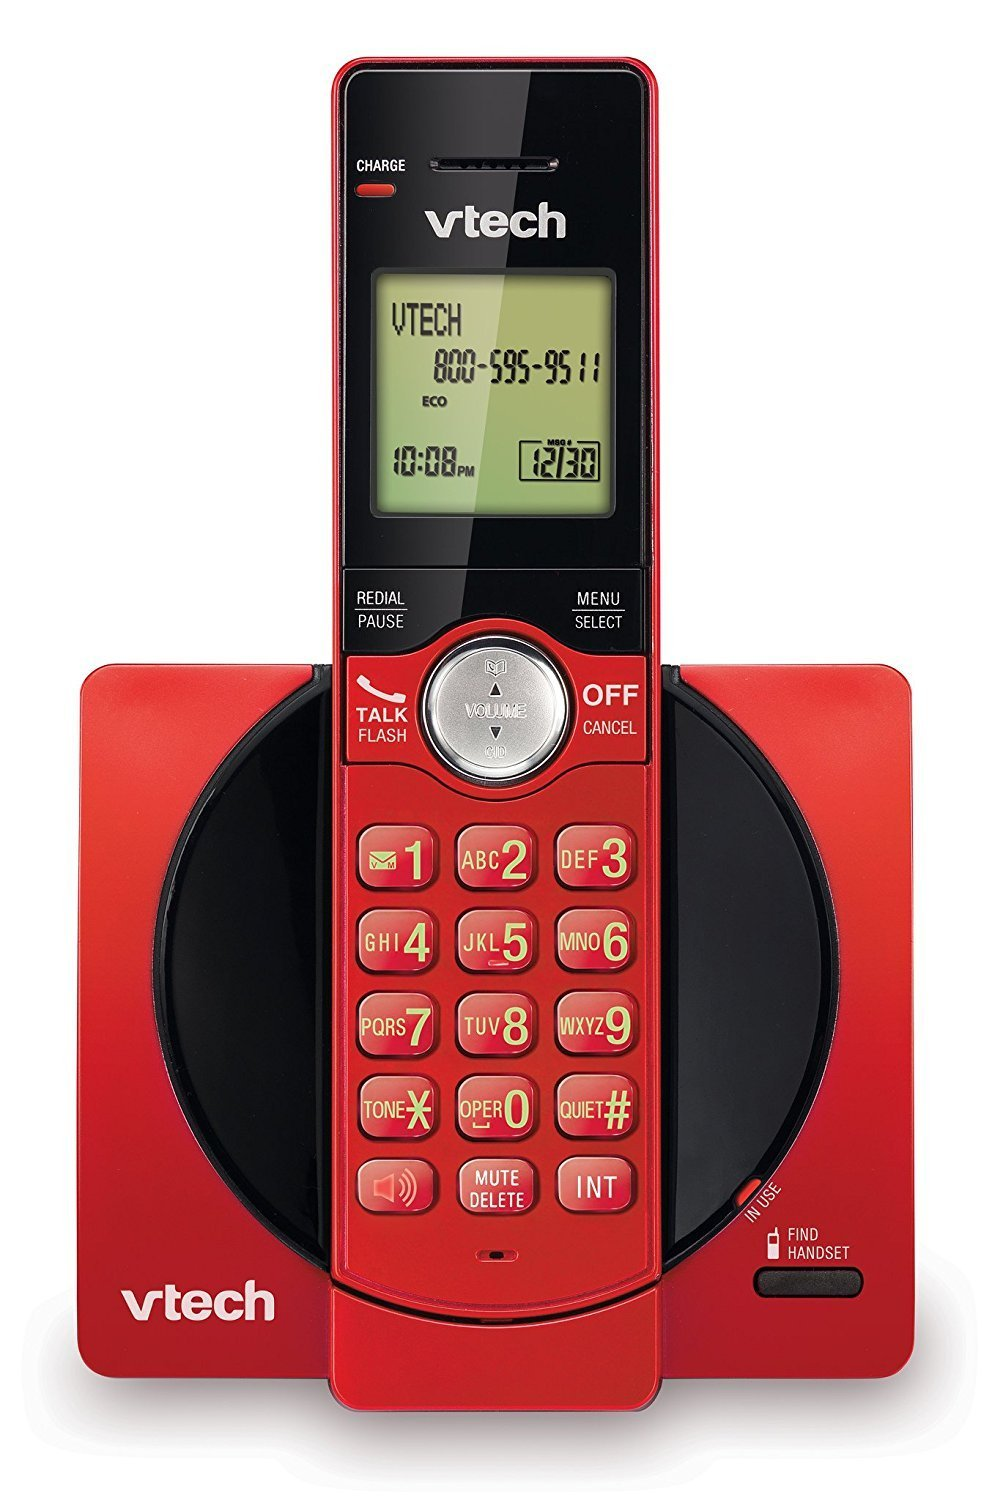 Vtech Cs6919-16 Dect 6.0 Cordless Phone With Caller Id/call Waiting - Red [ln]™